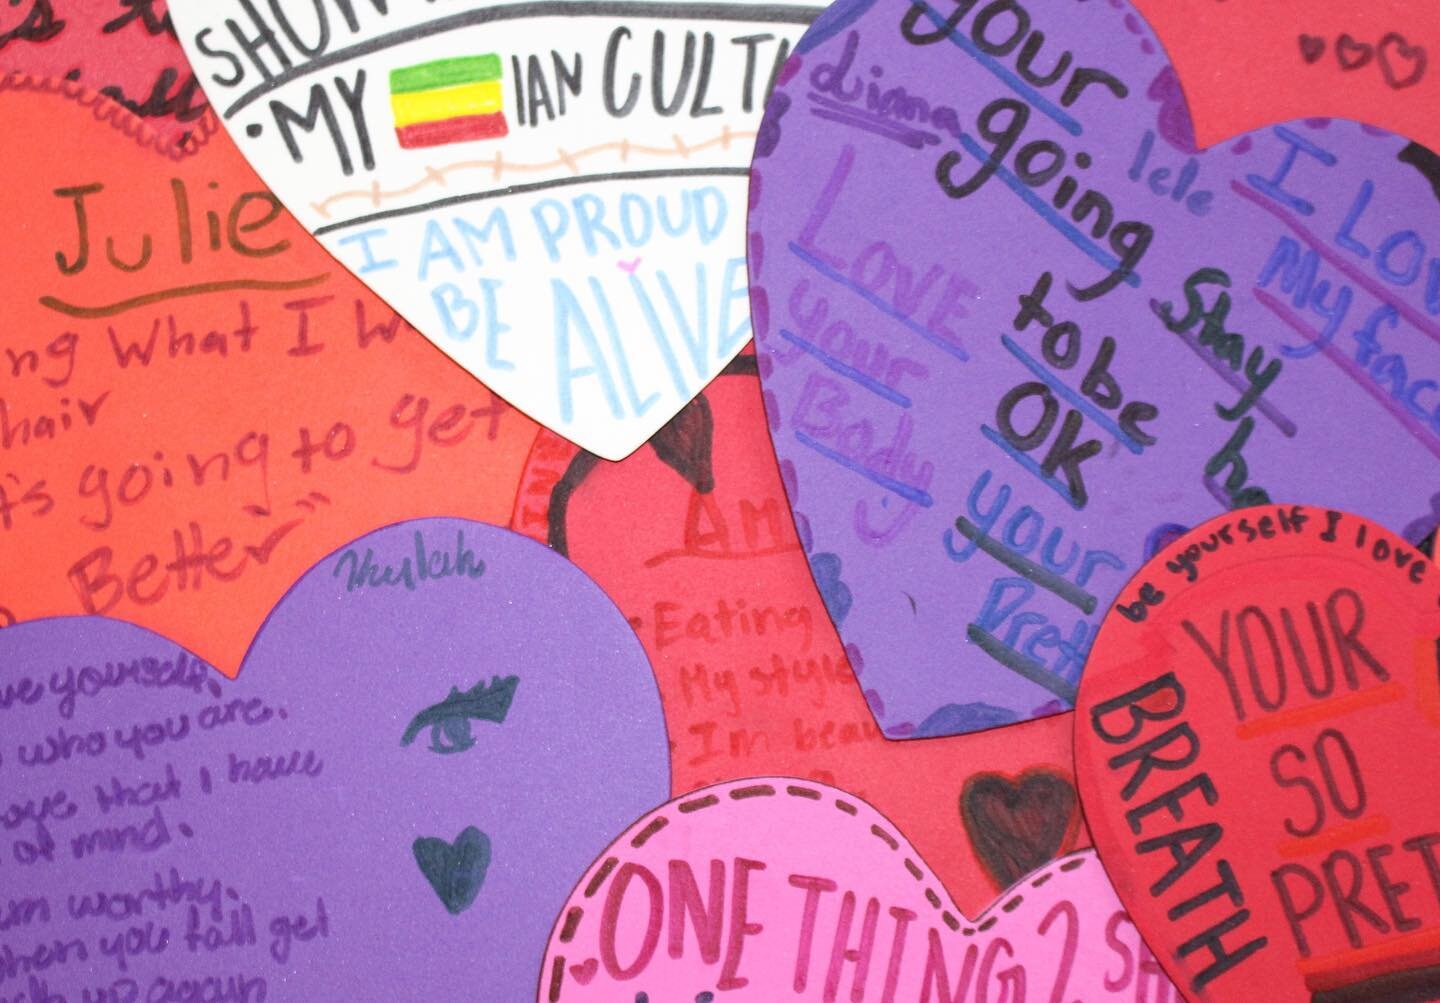 Some of the SkaterTots LoveHearts from Valentine&rsquo;s week 💝

Each includes:
1 thing they can do for their body to show self-love.
1 thing they can do for their mind to show self-love.
1 thing they love about themselves.
1 thing they can say to t